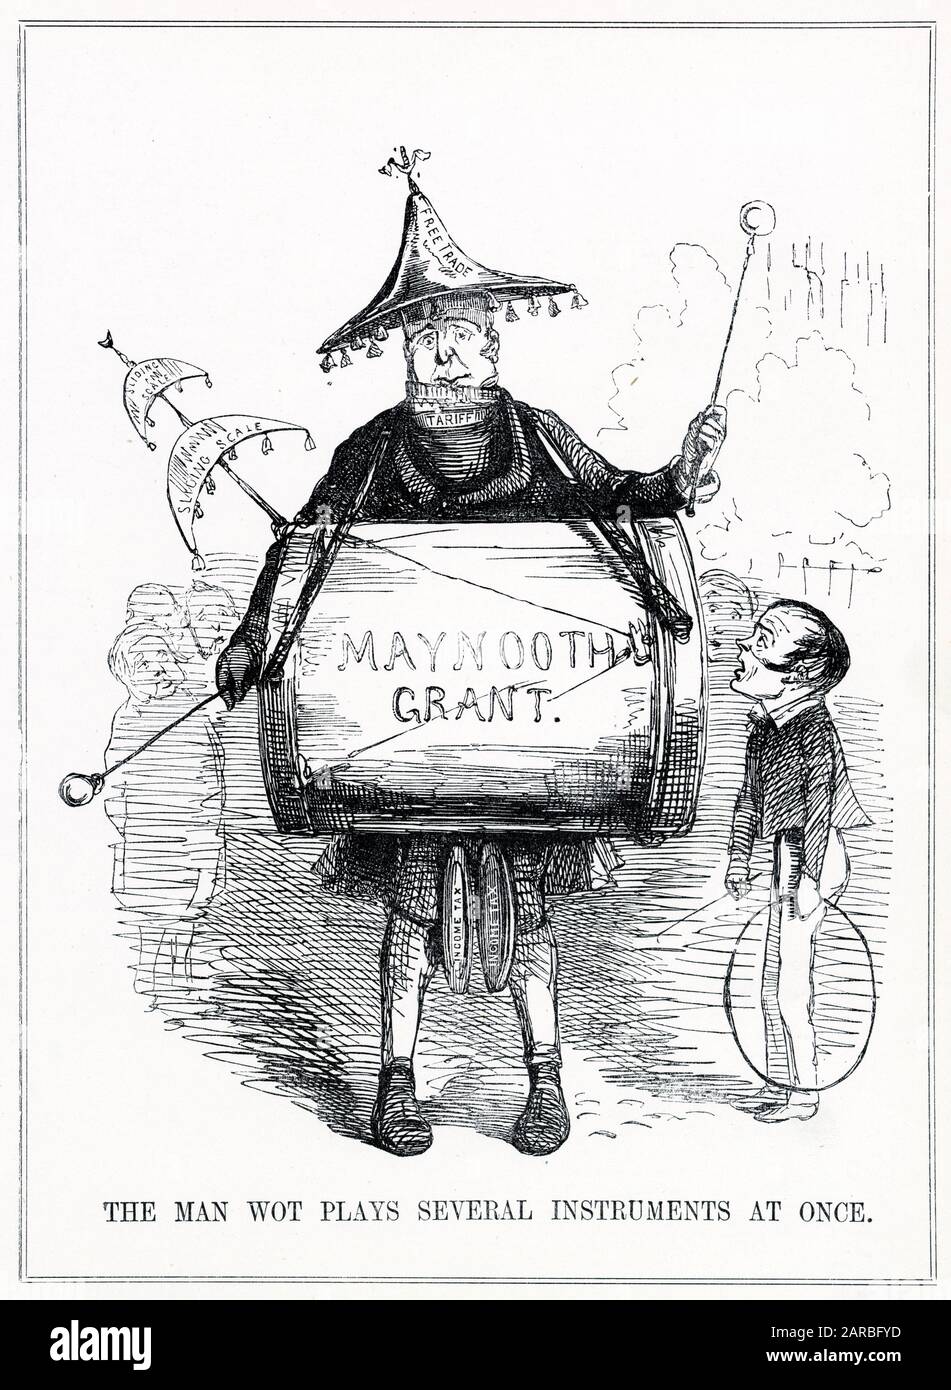 Cartoon, The Man Wot Plays Several Instruments At Once -- a satirical comment on Sir Robert Peel's attempt to improve Protestant-Catholic relationships by increasing a grant to Maynooth College, a Catholic seminary in Ireland, which provoked great opposition in the English parliament. Peel is depicted banging a big drum, while Lord John Russell, typically depicted as a small boy, looks up at him in puzzlement. Stock Photo